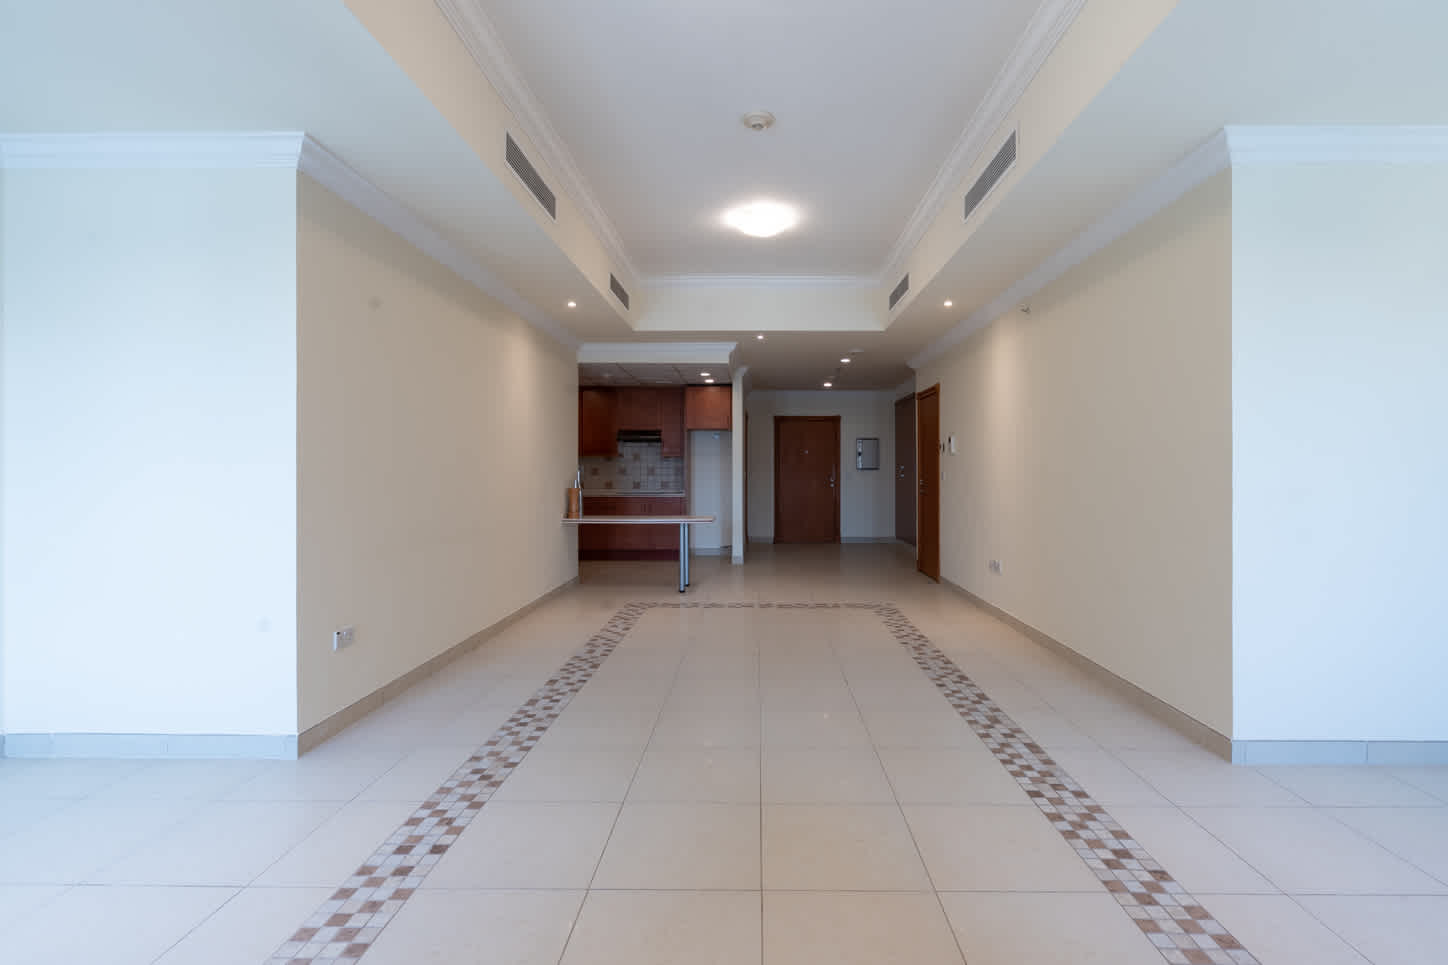 25 Spaces Real Estate - Porto Arabia - Properties for Rent - 16 March 2023 refWAPT258069 (8)